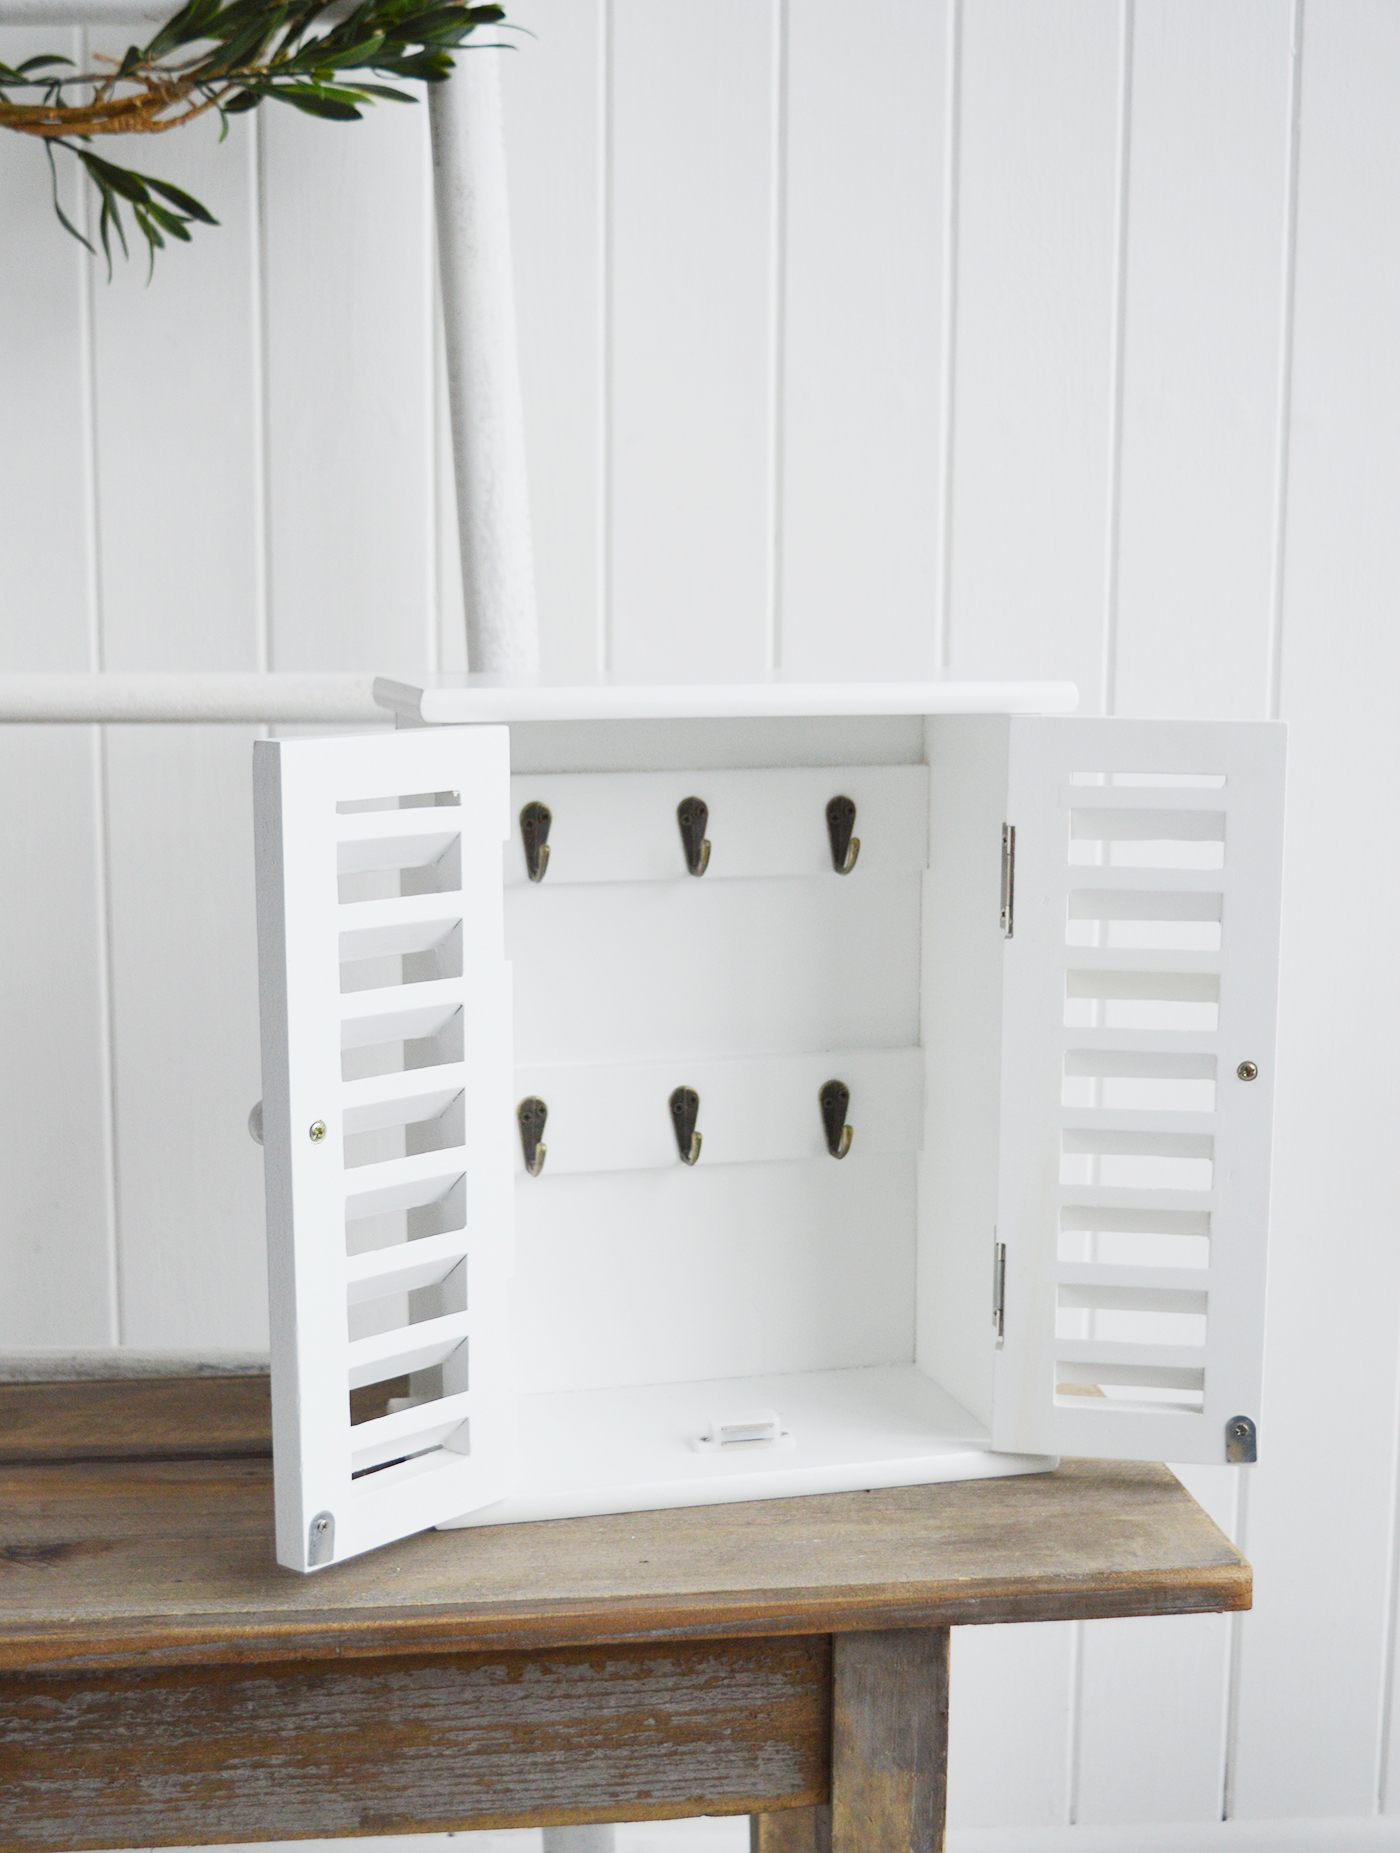 White Key Cupboard for white interiors and furniture in New England styled homes in the country, by the coast or in the city